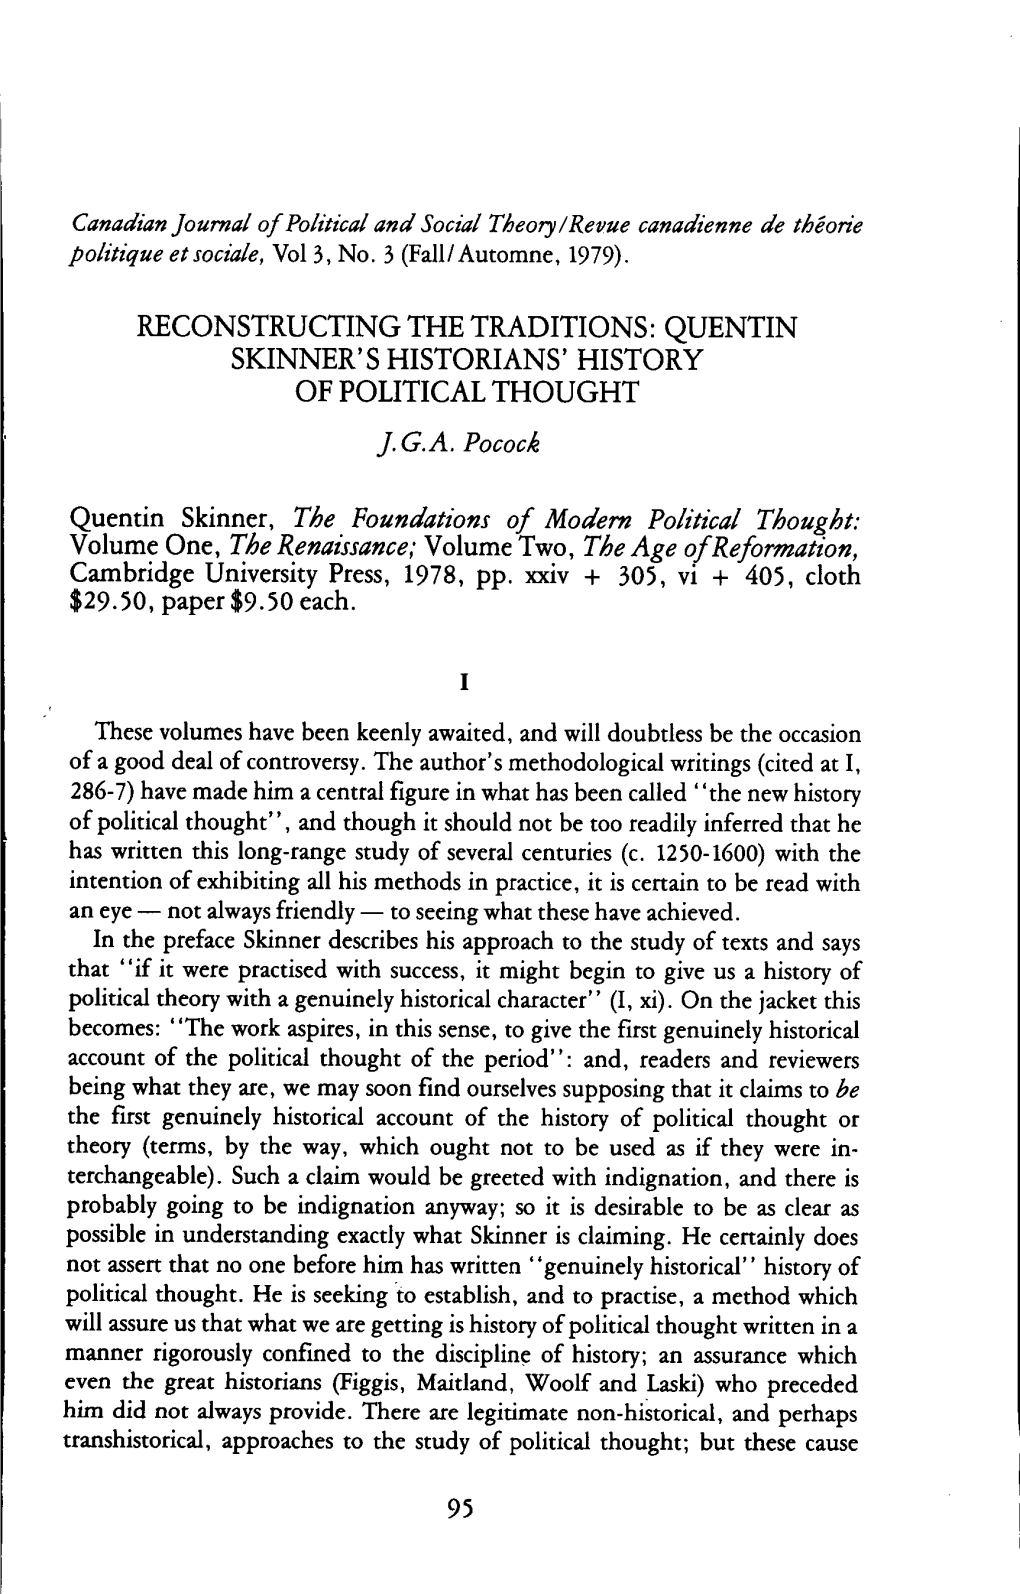 Quentin Skinner, the Foundations of Modern Political Thought: Volume One, the Renaissance; Volume Two, the Age Ofreformation, Cambridge University Press, 1978, Pp